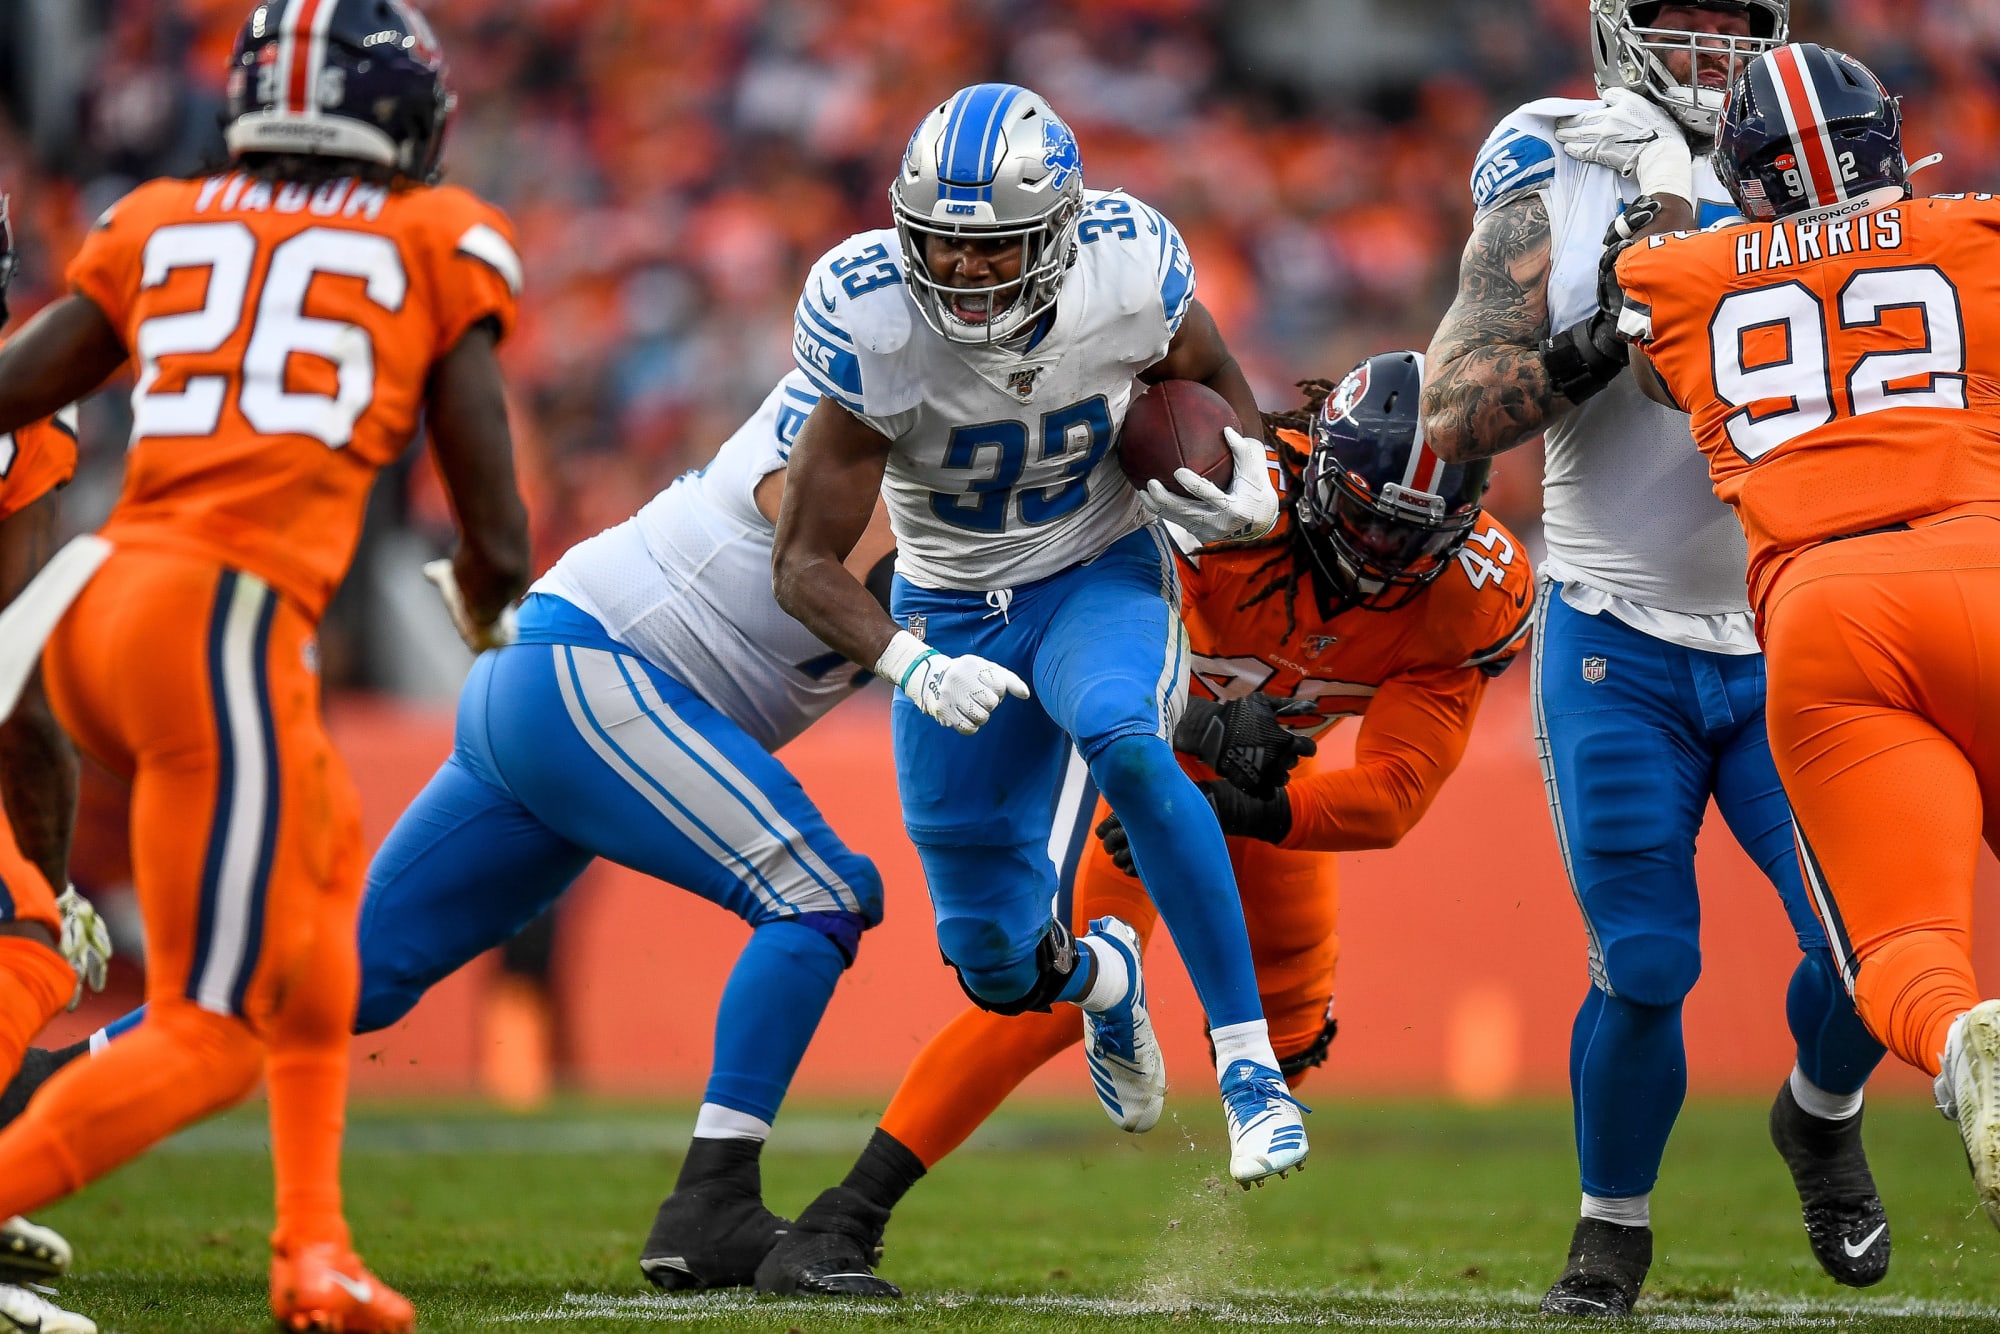 Can the Detroit Lions current running backs break this record?